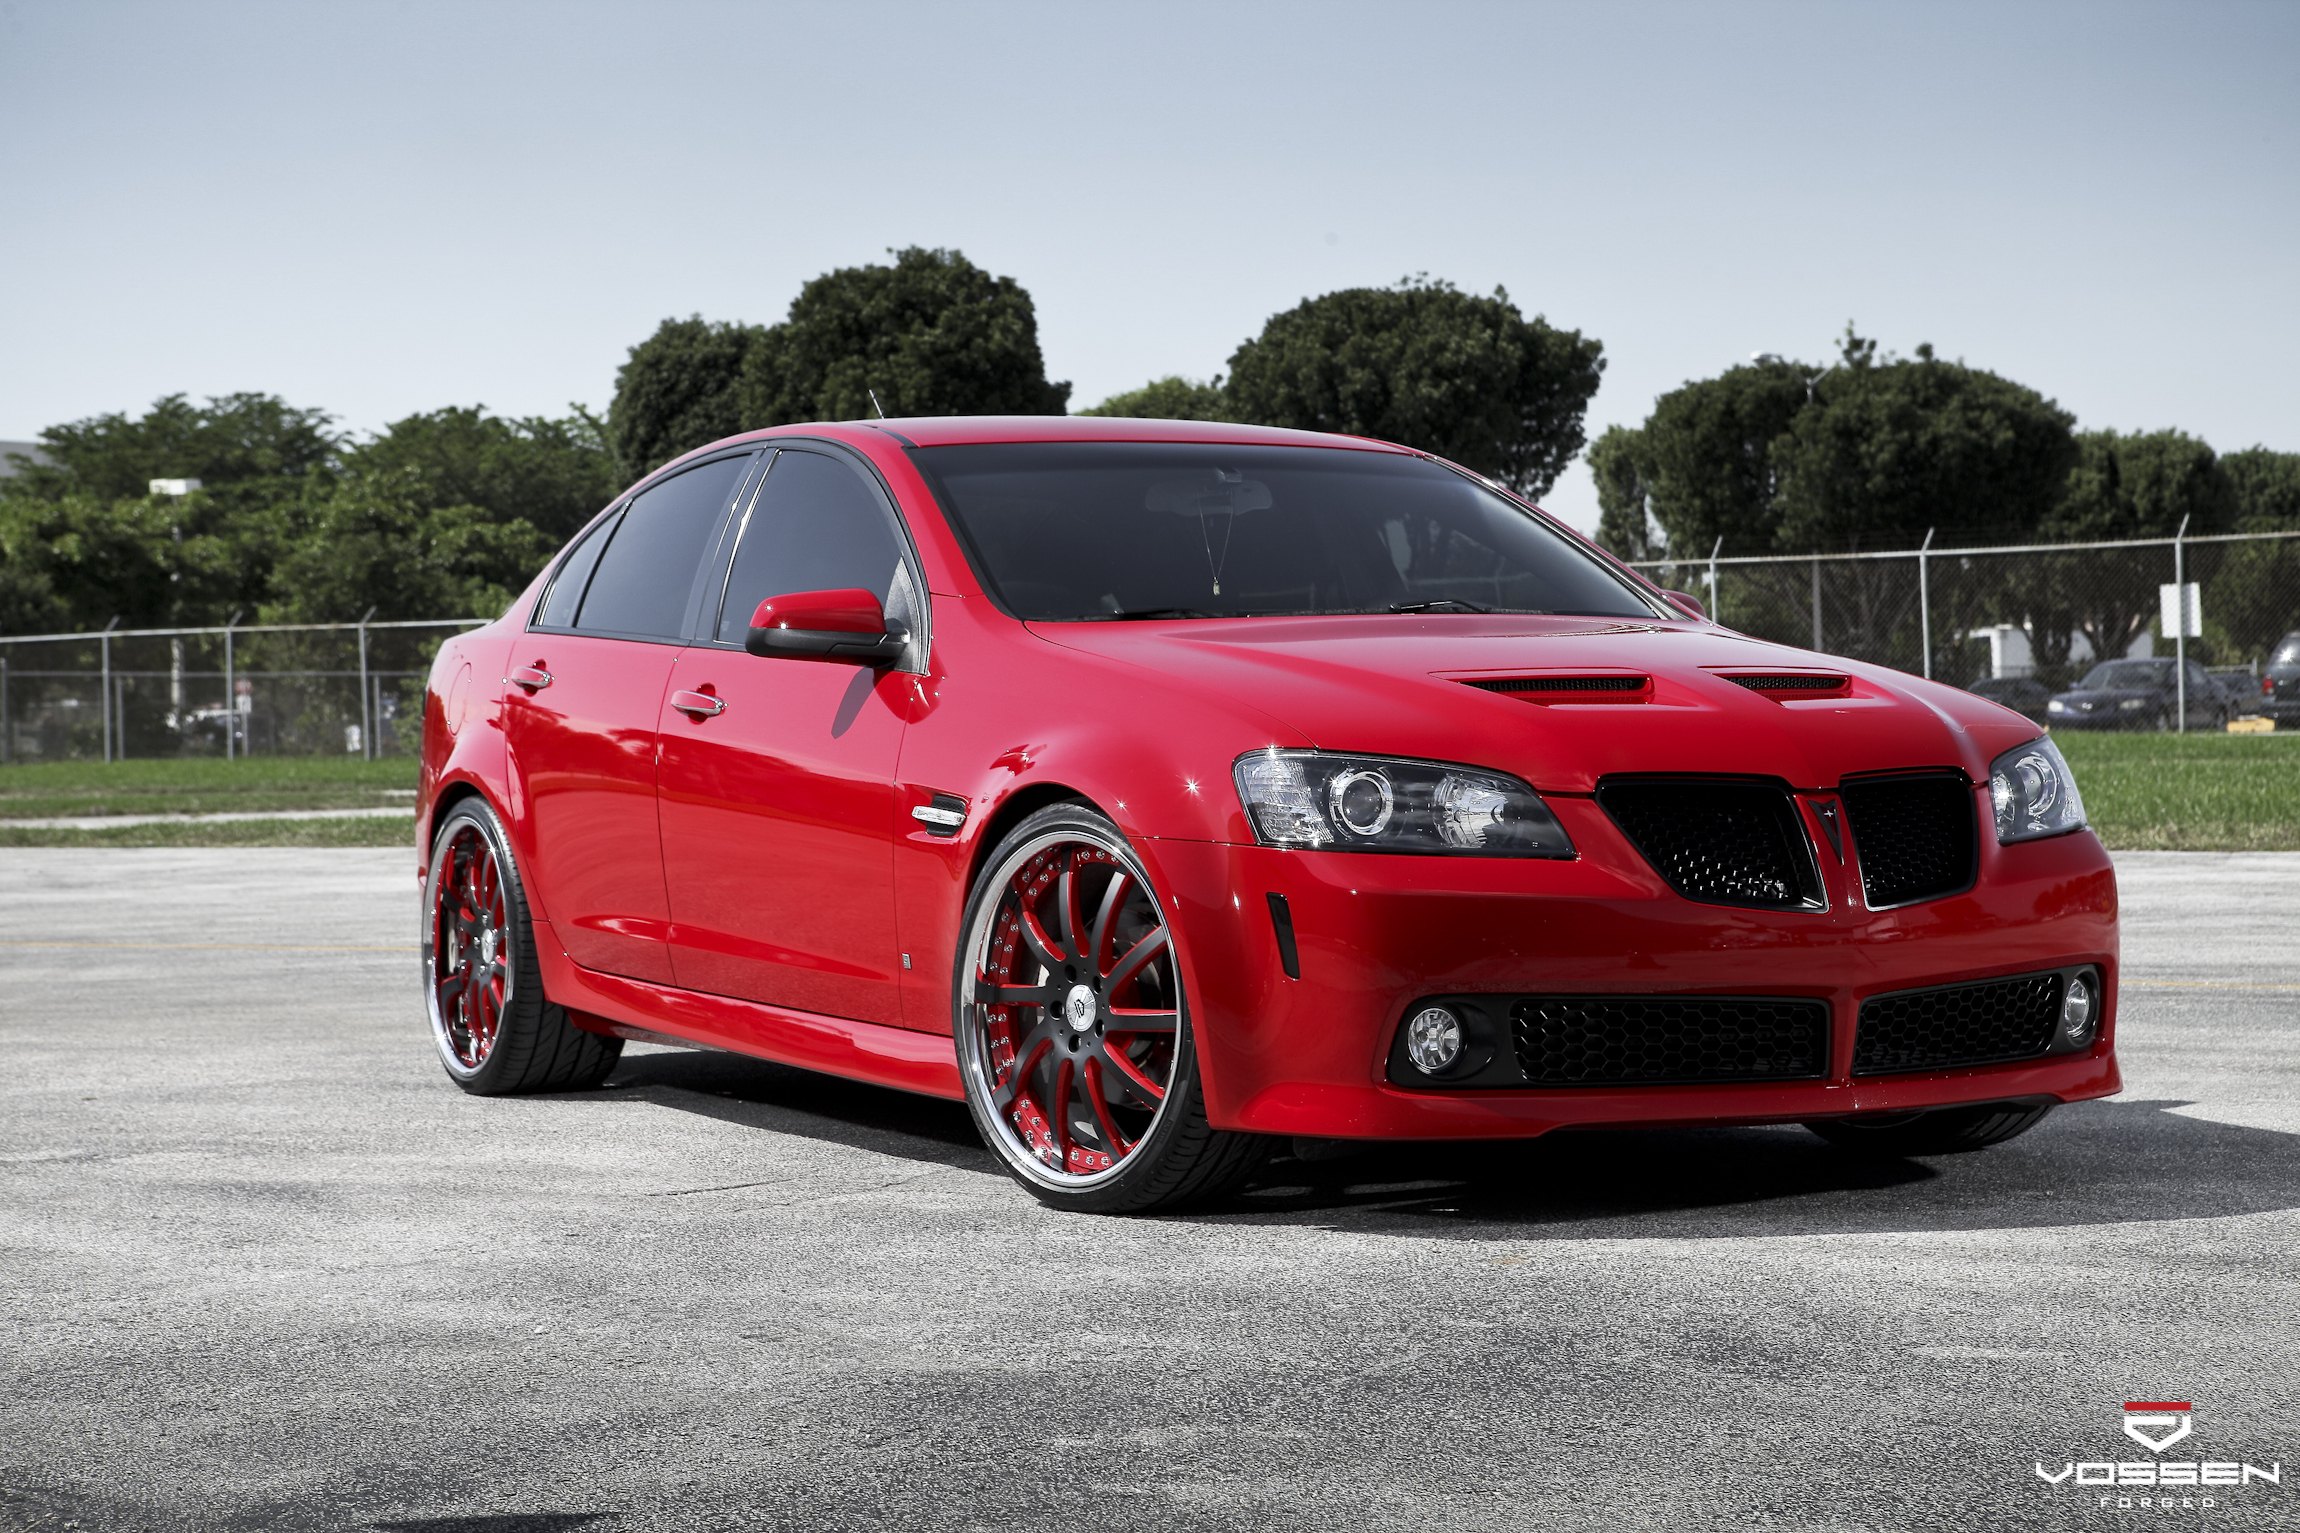 Red Pontiac G8 with Custom Vented Hood - Photo by Vossen